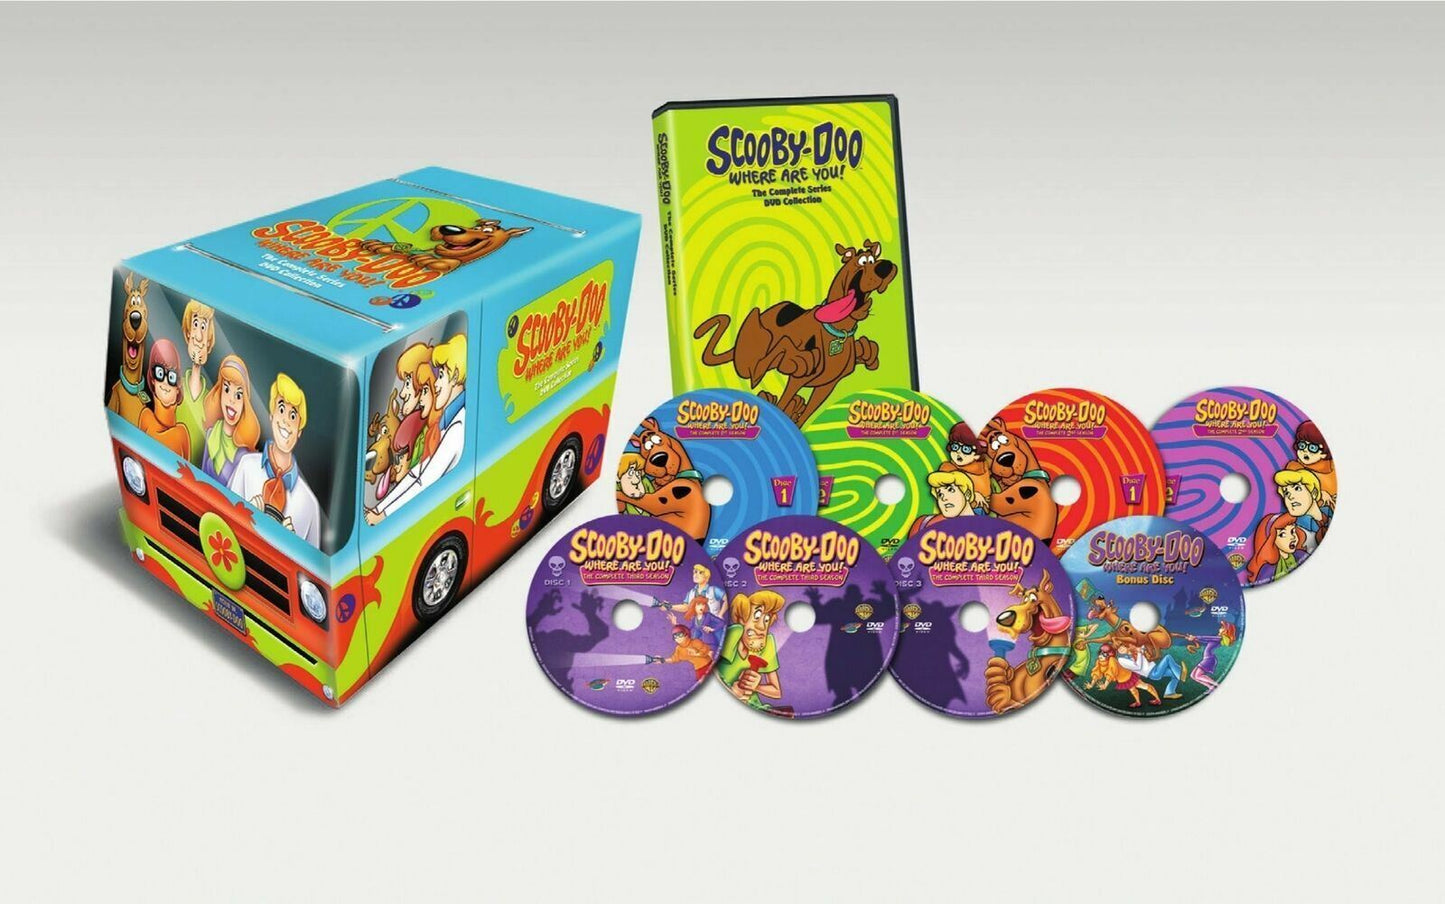 SCOOBY-DOO, WHERE ARE YOU!  - DVD-COMPLETE SERIES (W/VAN)